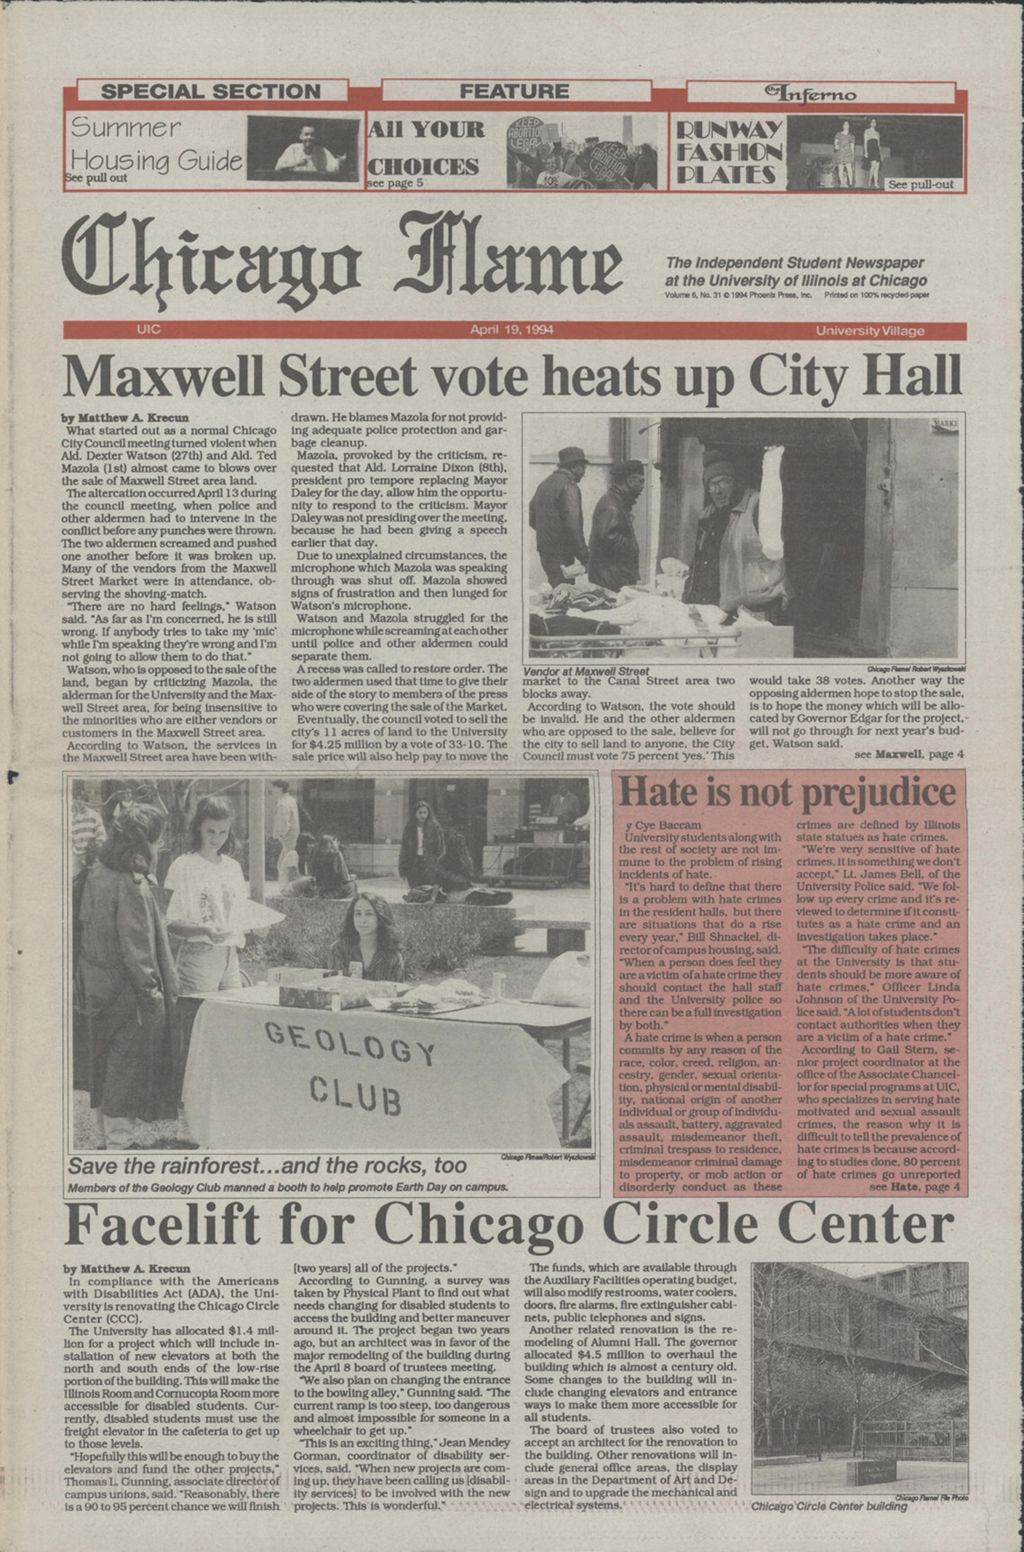 Miniature of Chicago Flame (April 19, 1994)